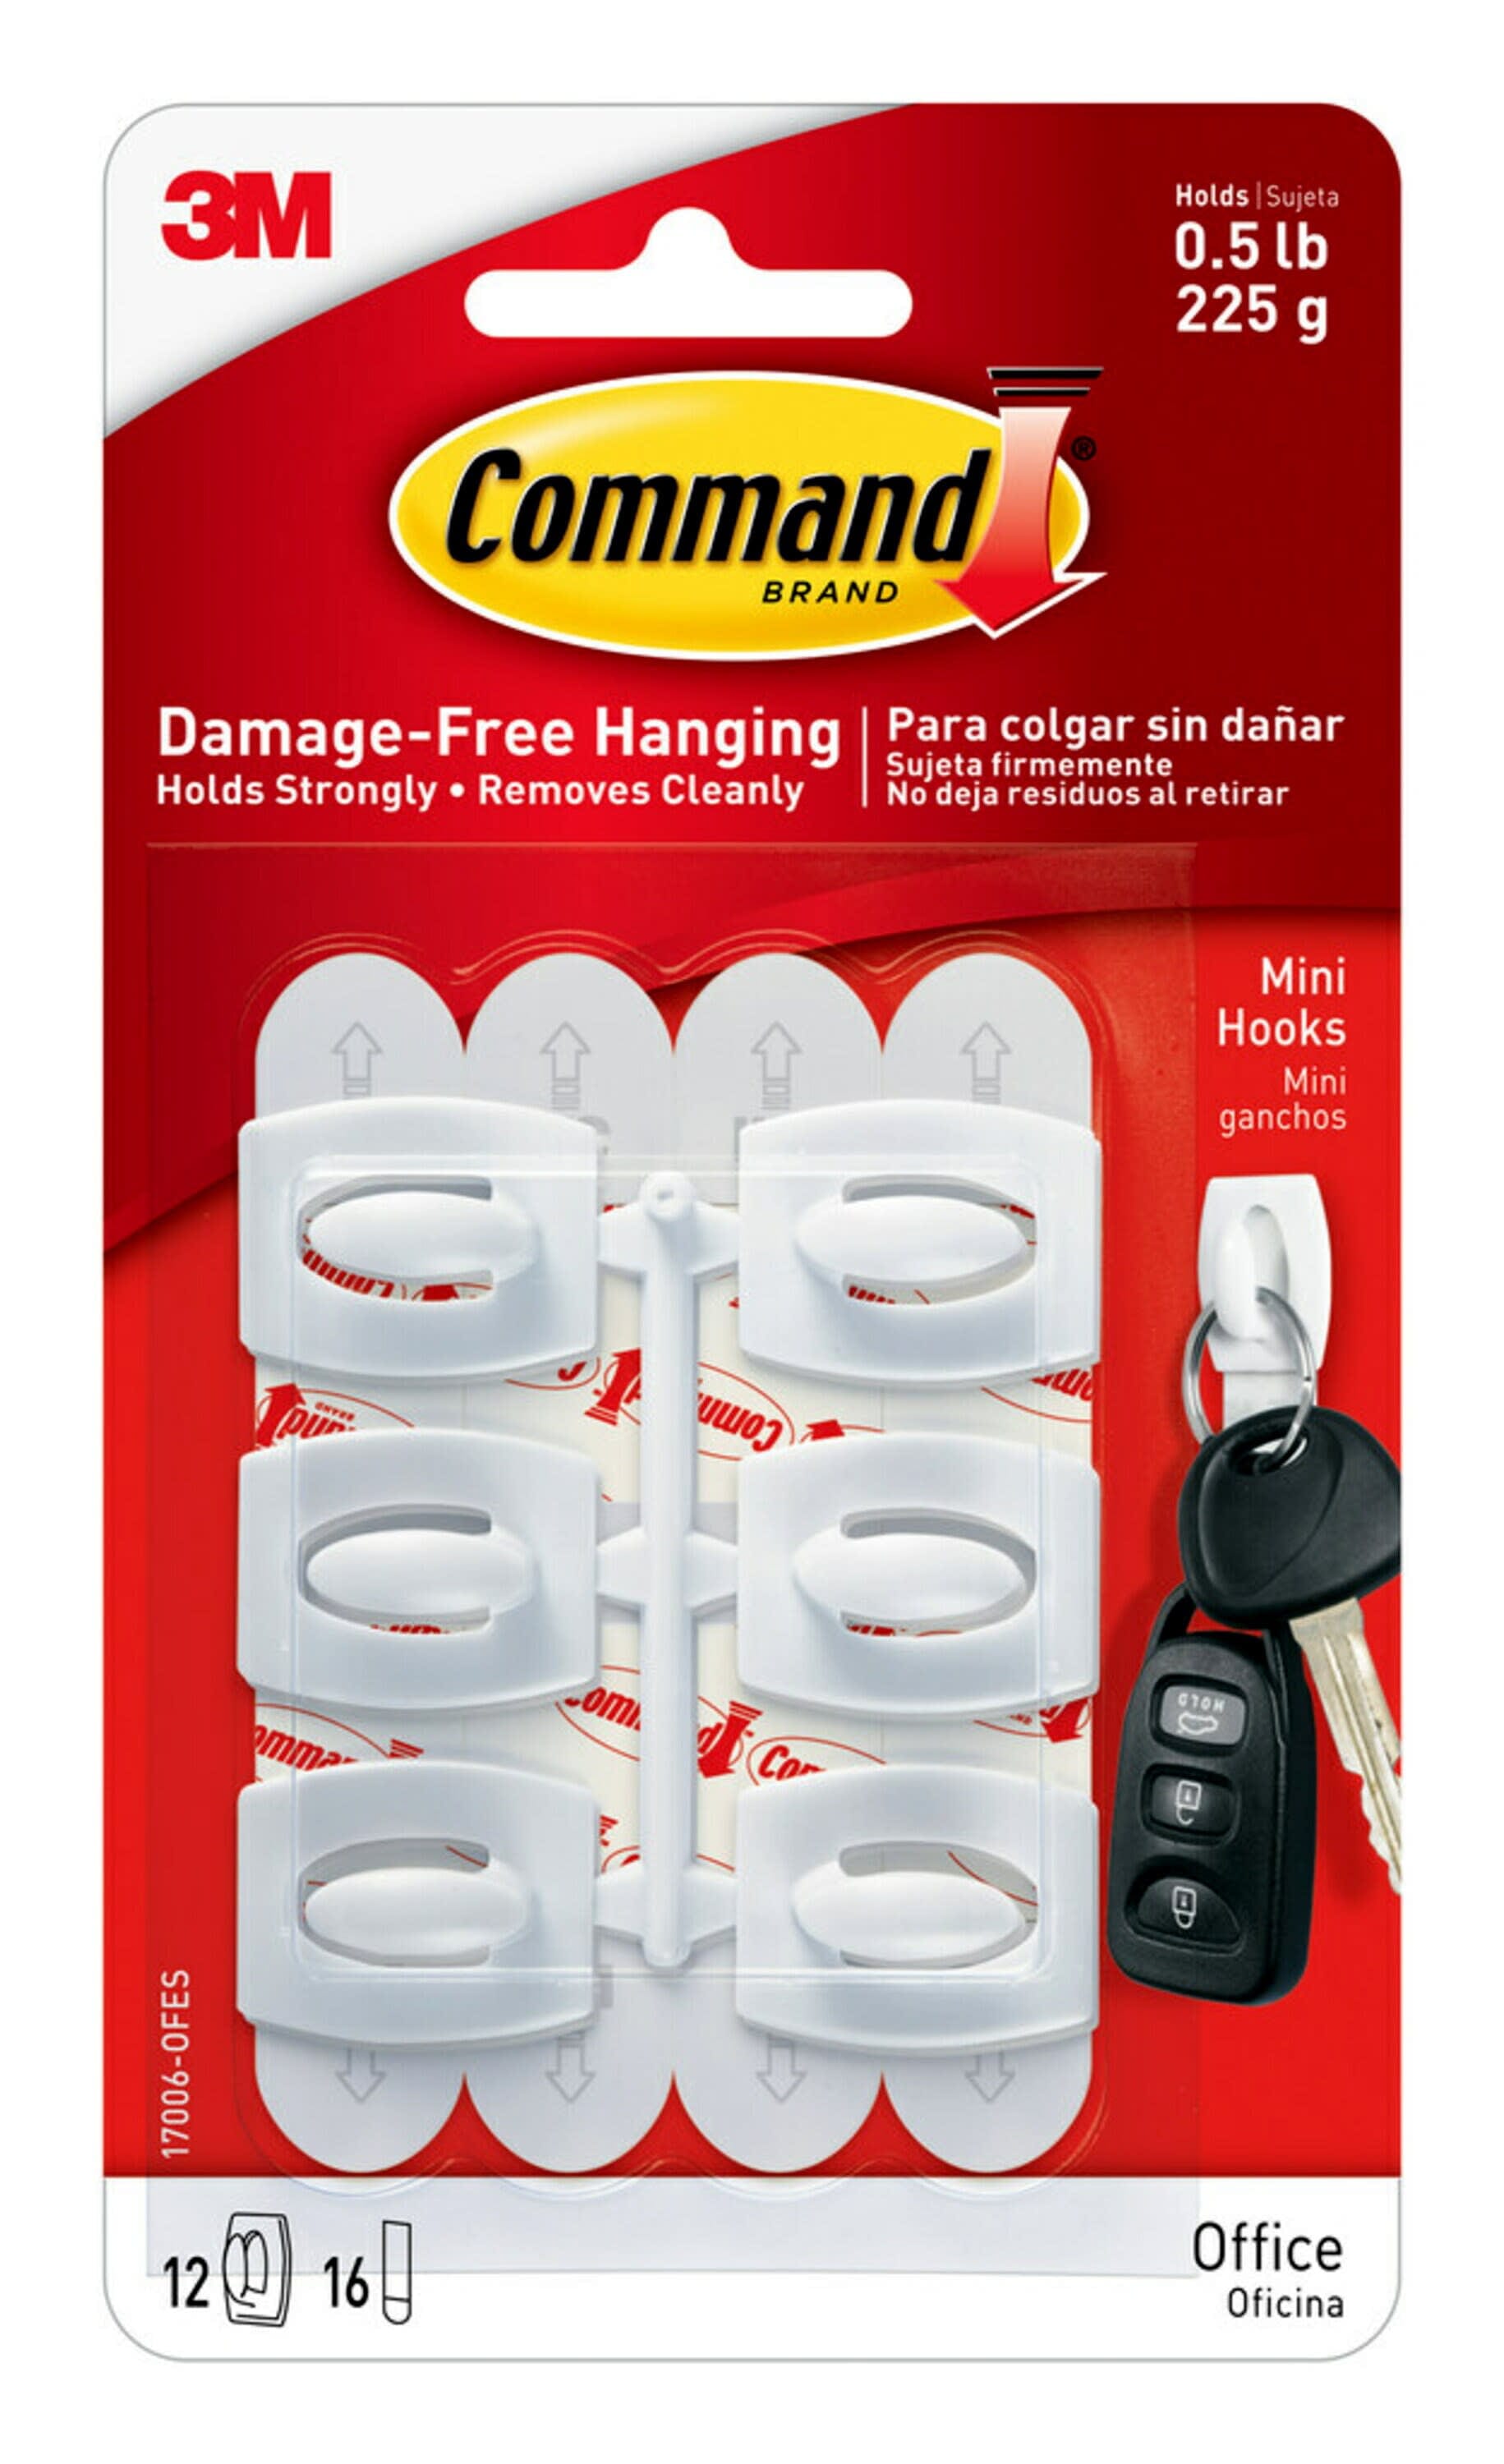 Command Outdoor Foam Strip Refills, White, Small, 16 Strips/Pack 